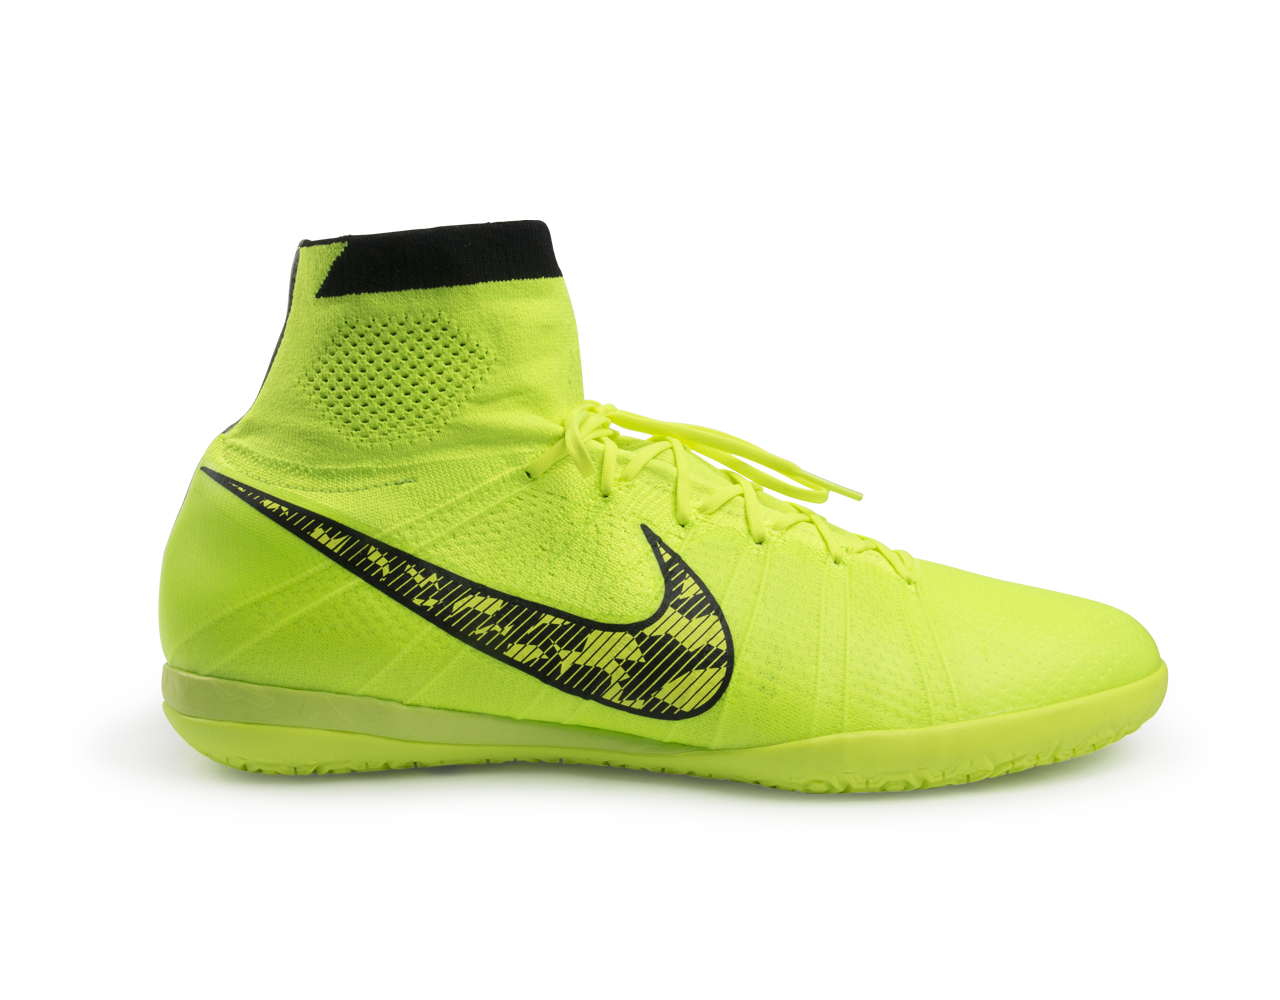 Nike Men's Elastico Superfly Indoor Shoes Soccer Shoes – Azteca Soccer